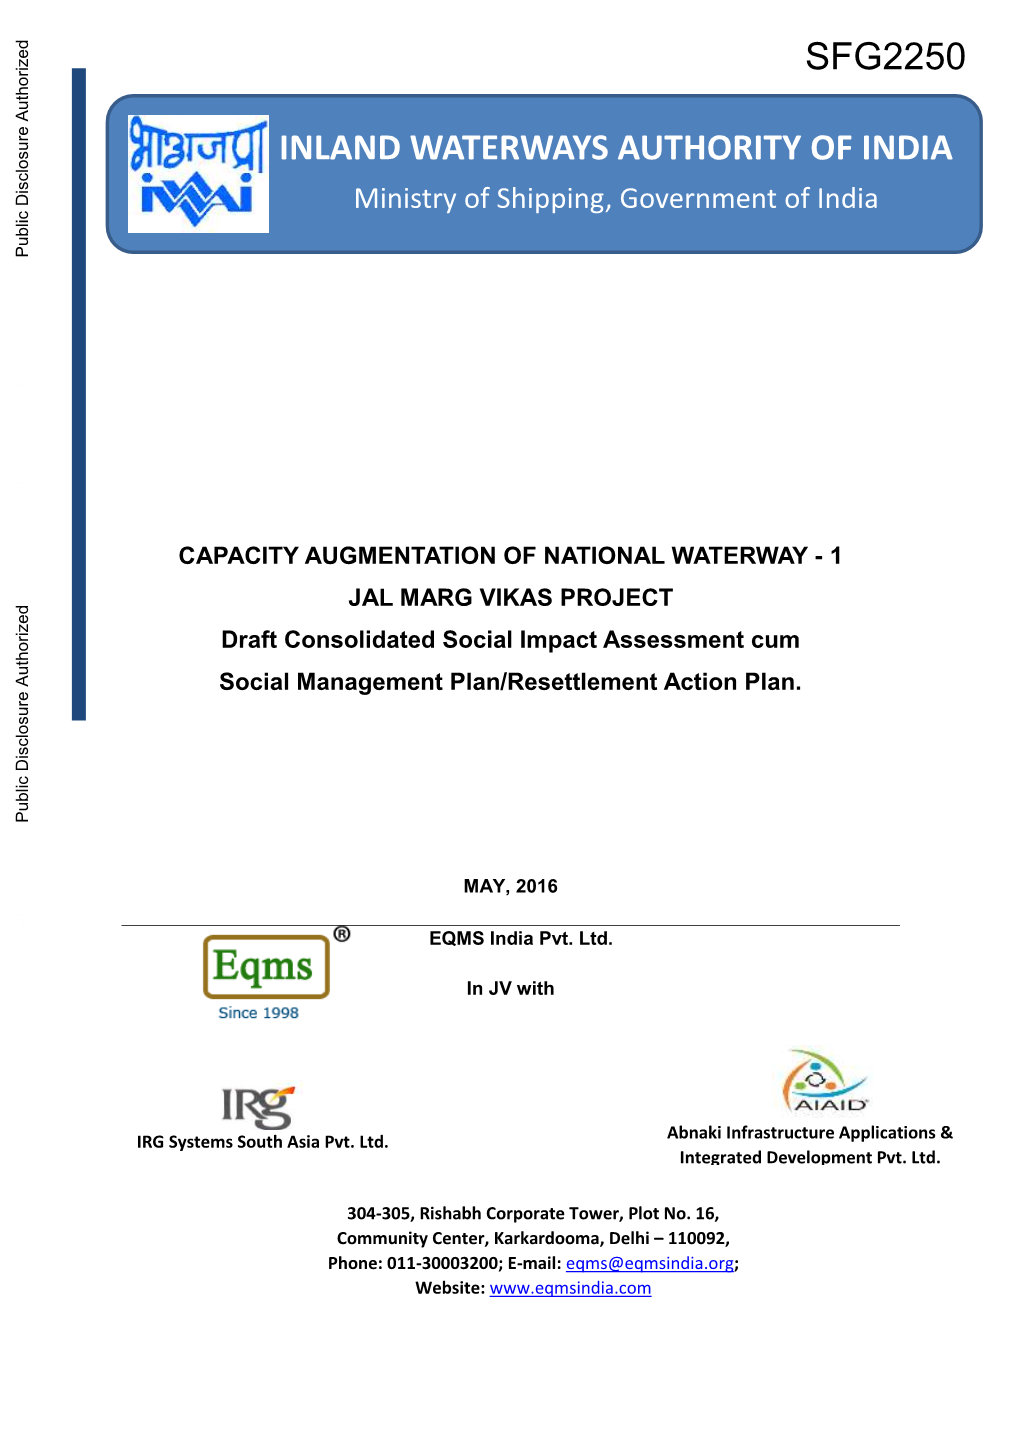 First Phase of Capacity Augmentation of The